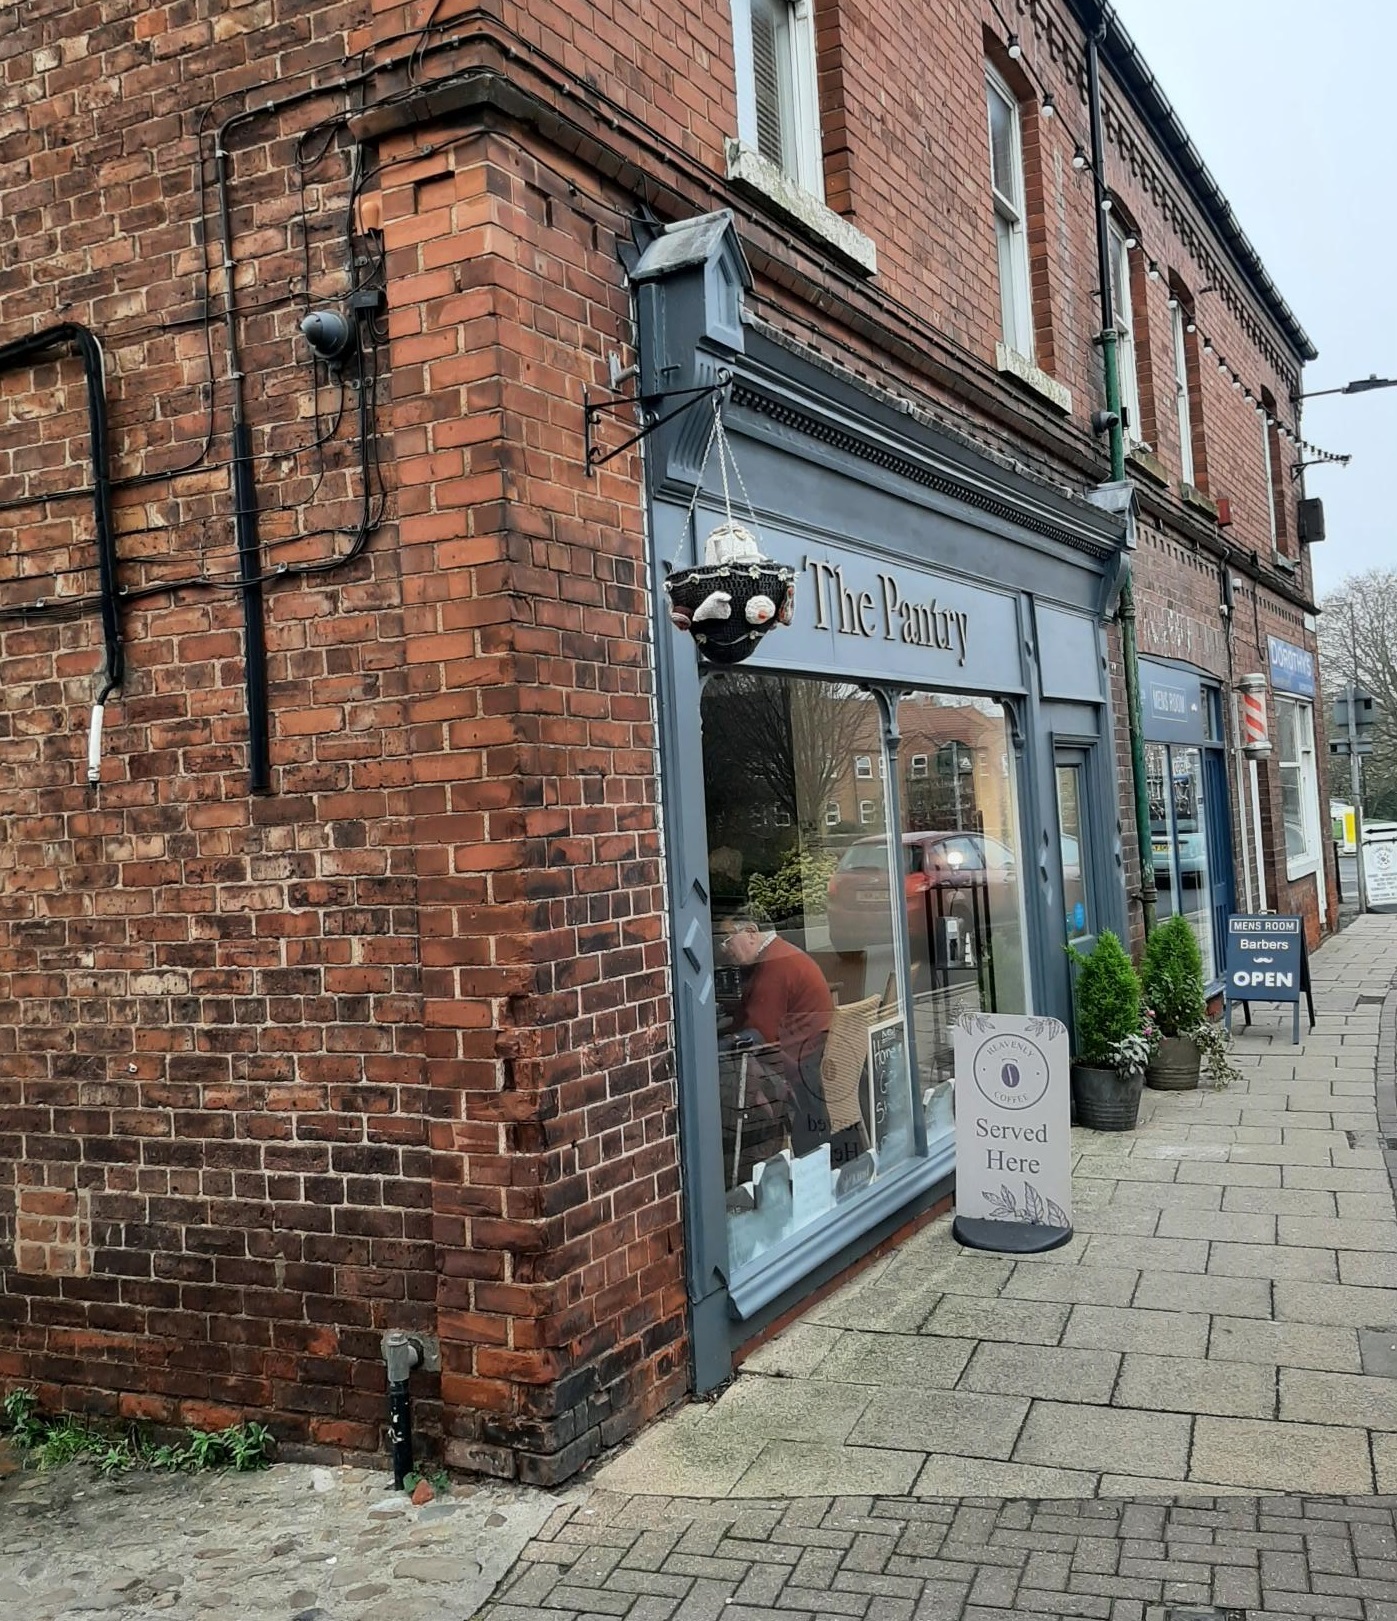 The Pantry on Millgate, Thirsk